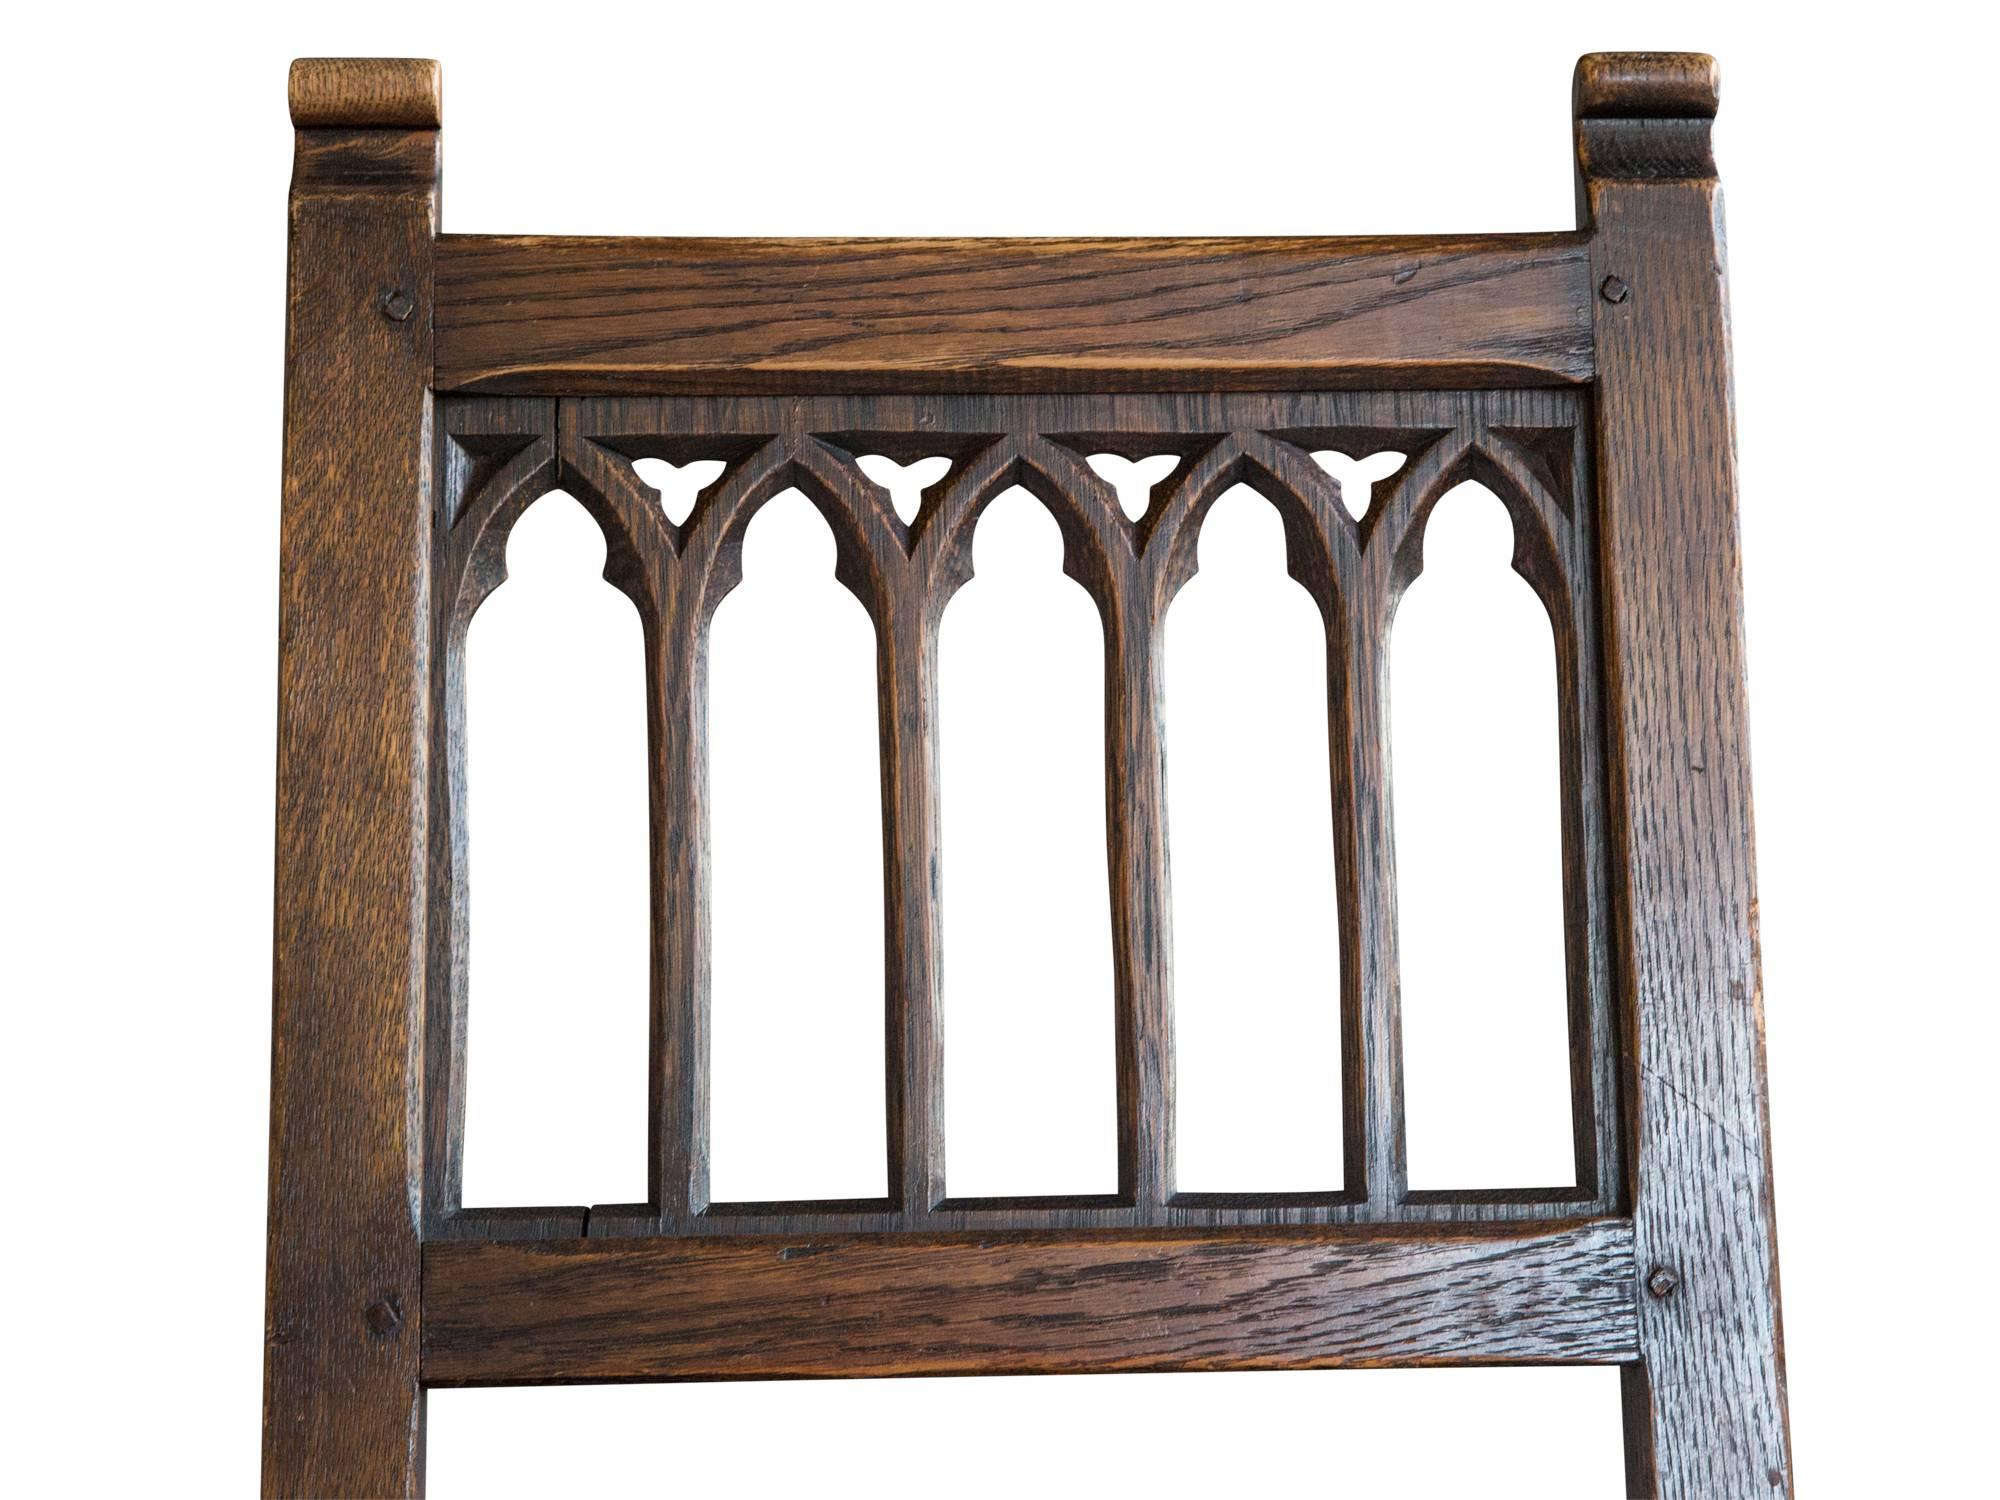 Upholstery Set of Six Oak Gothic Revival Pew Chairs from Riverside Church For Sale